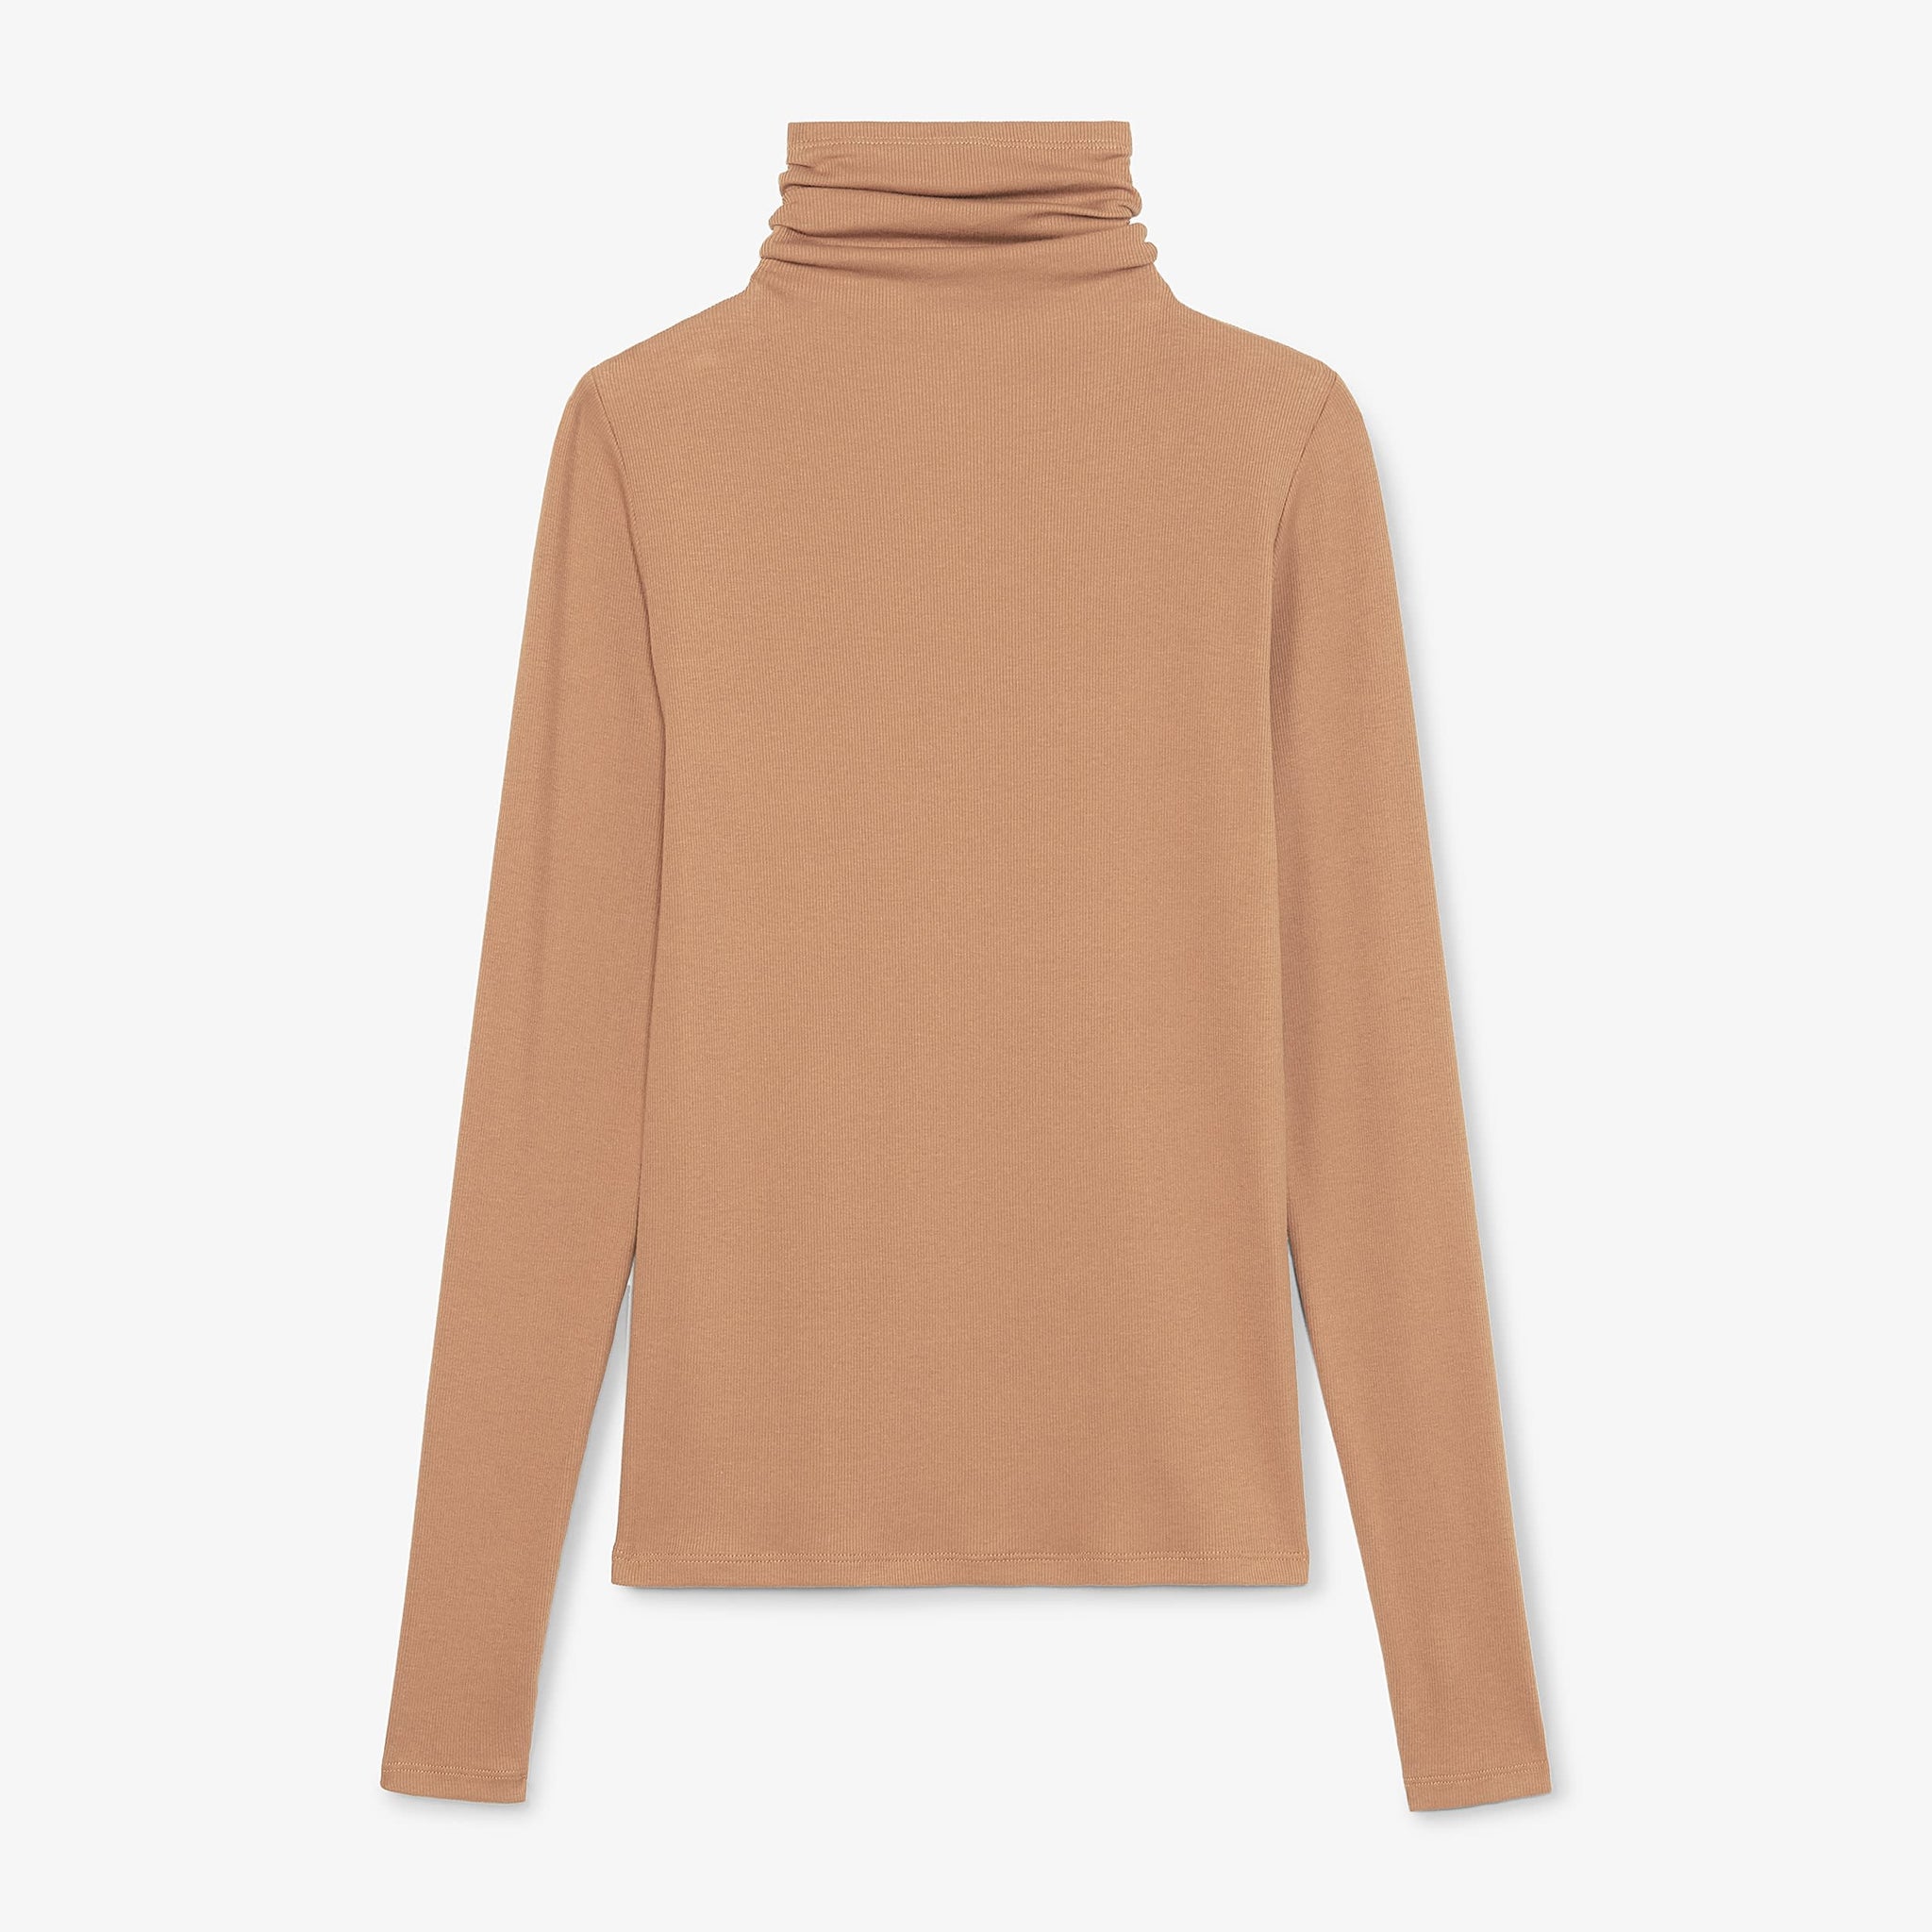 Packshot image of the axam top in camel